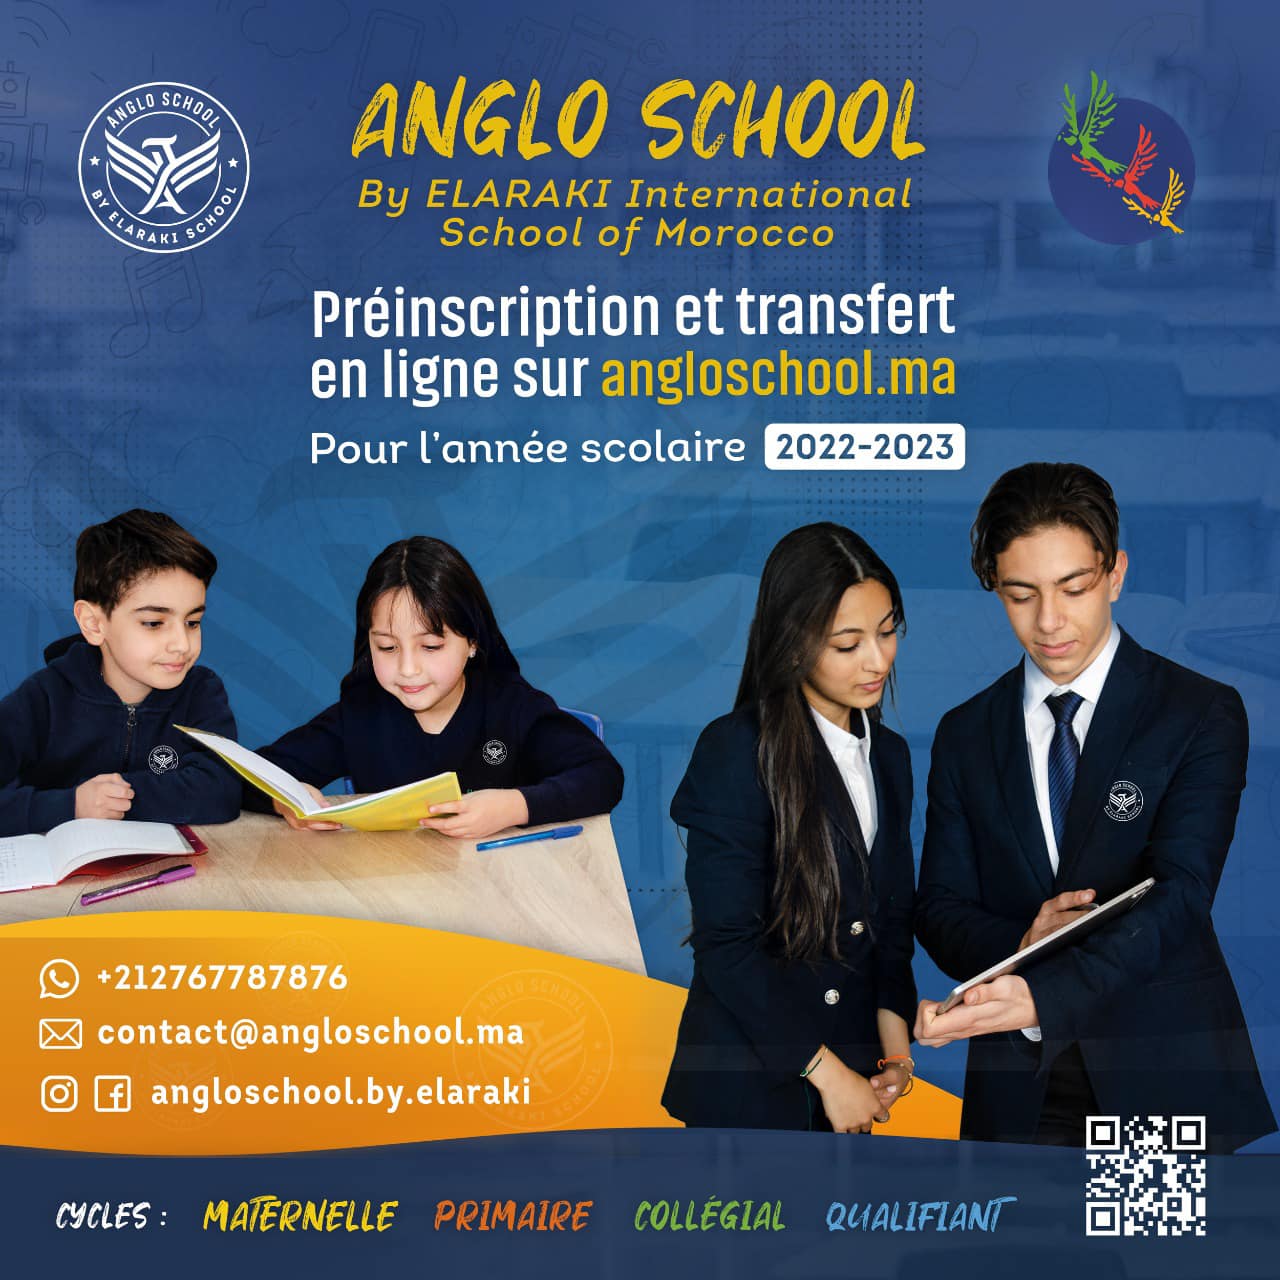 Launch of Anglo School 2022/2023